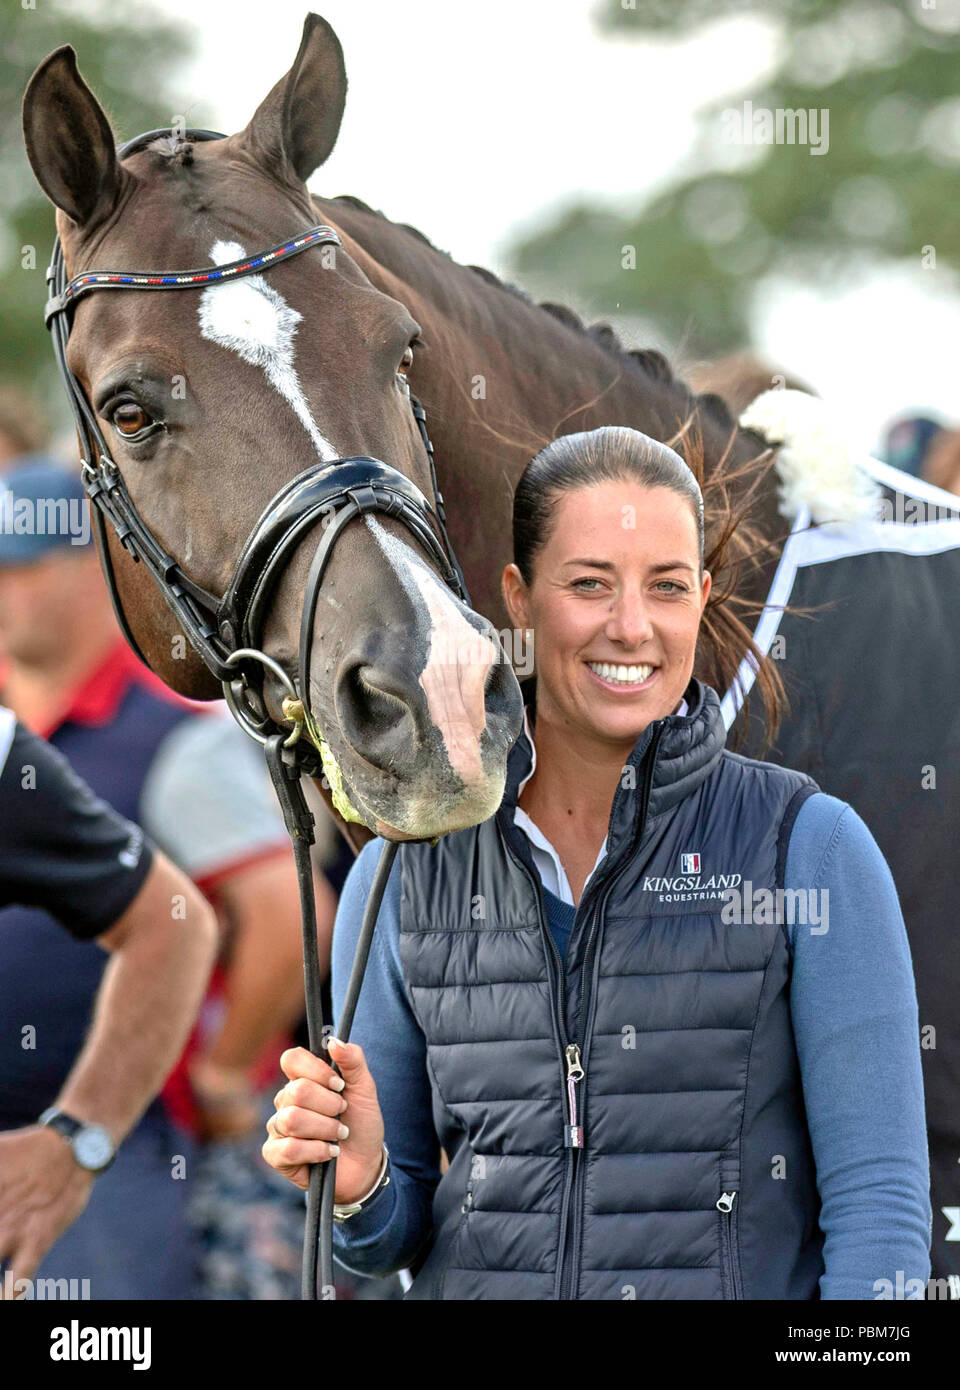 Double Olympic gold medal winner Charlotte Dujardin with her horse Valegro, during the International Day at the Royal County of Berkshire Polo Club in Winkfield, Windsor. Stock Photo